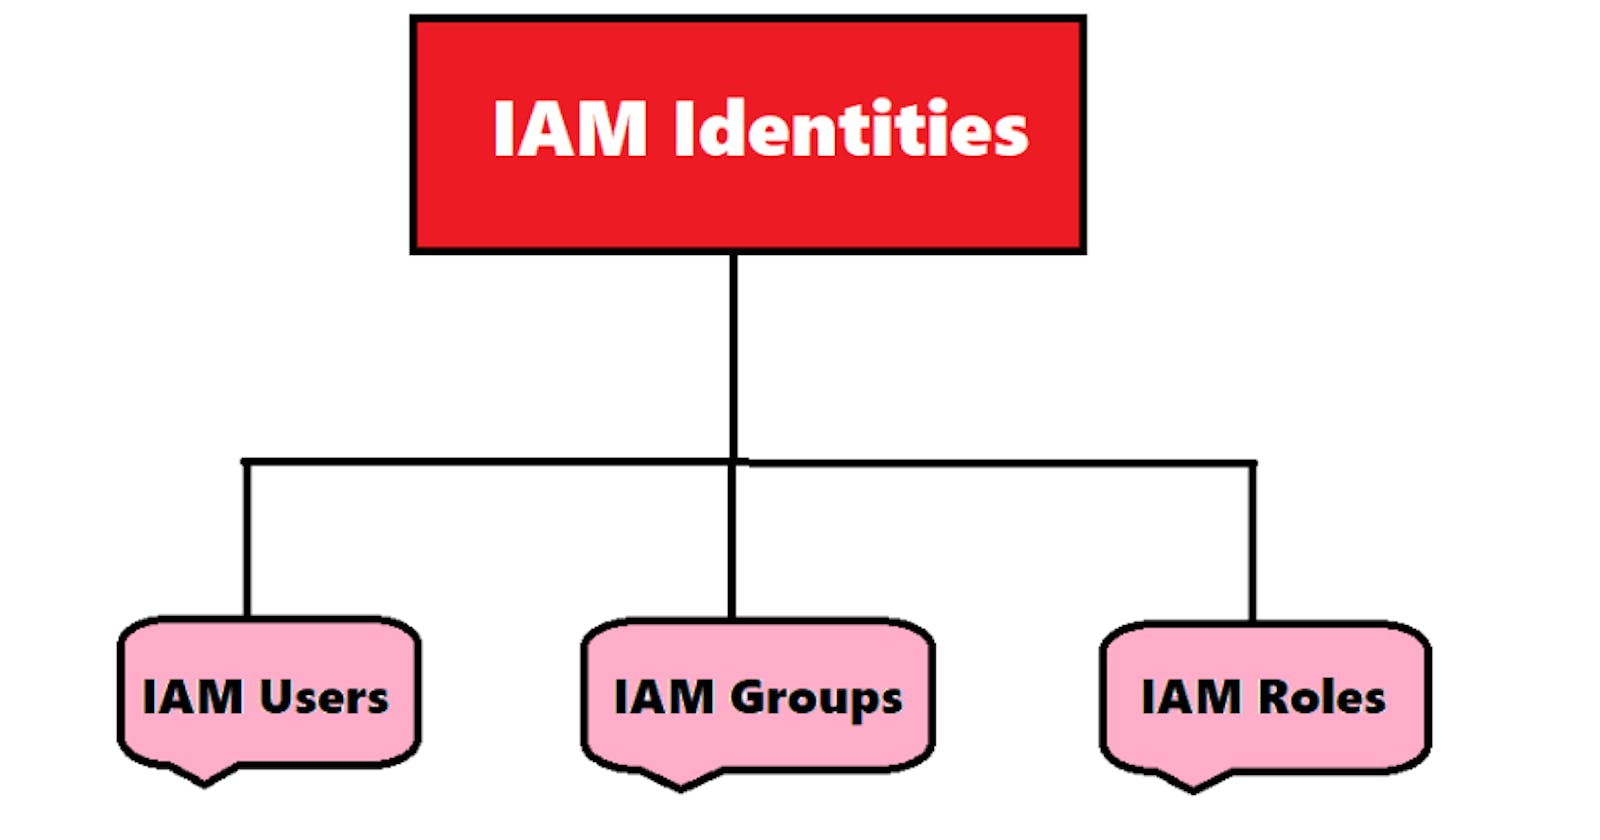 What are IAM Identities in AWS?